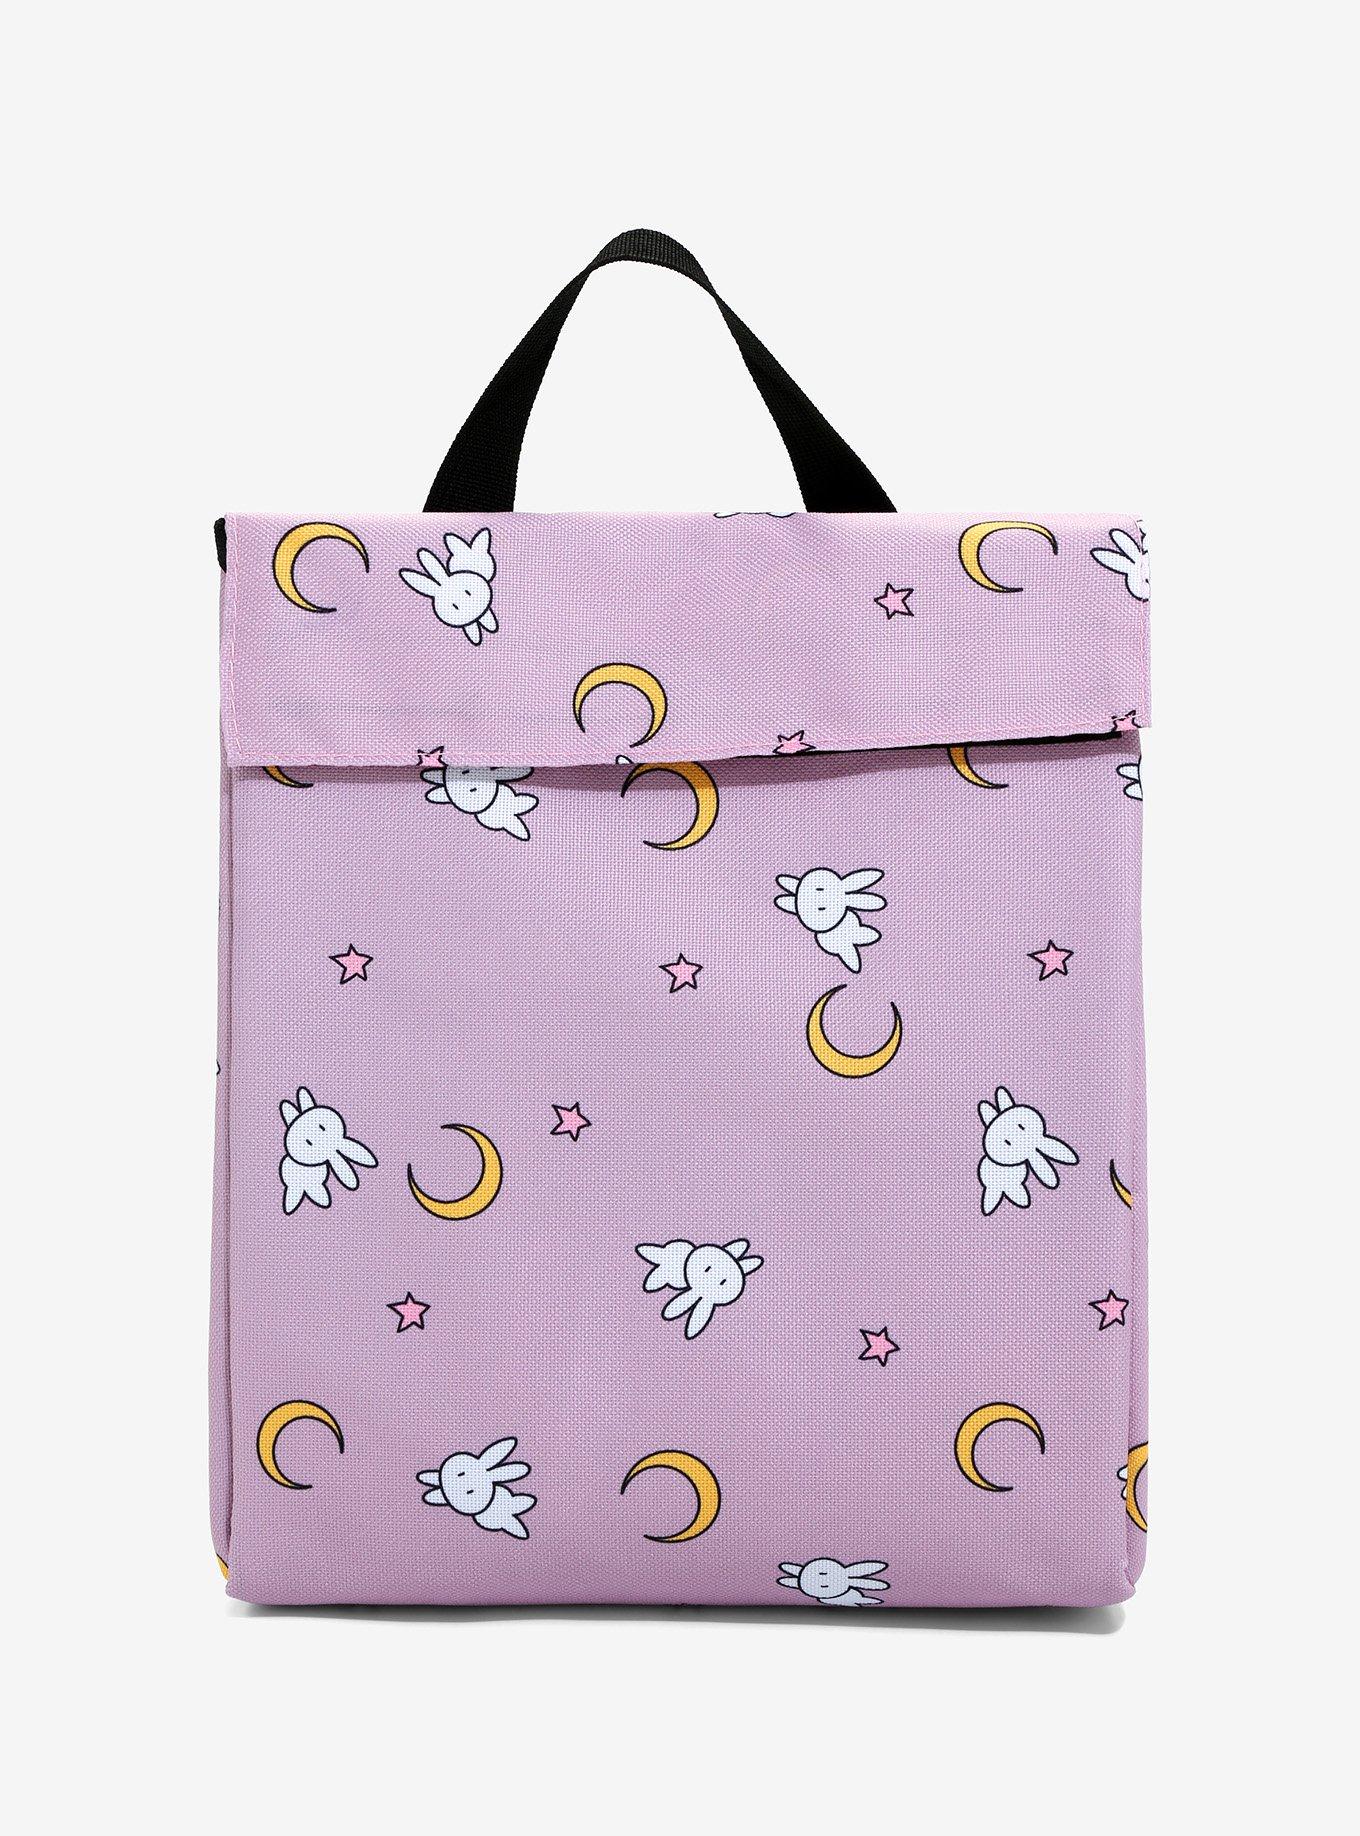 Sailor Guardians Sailor Moon Insulated Lunch Tote Bag